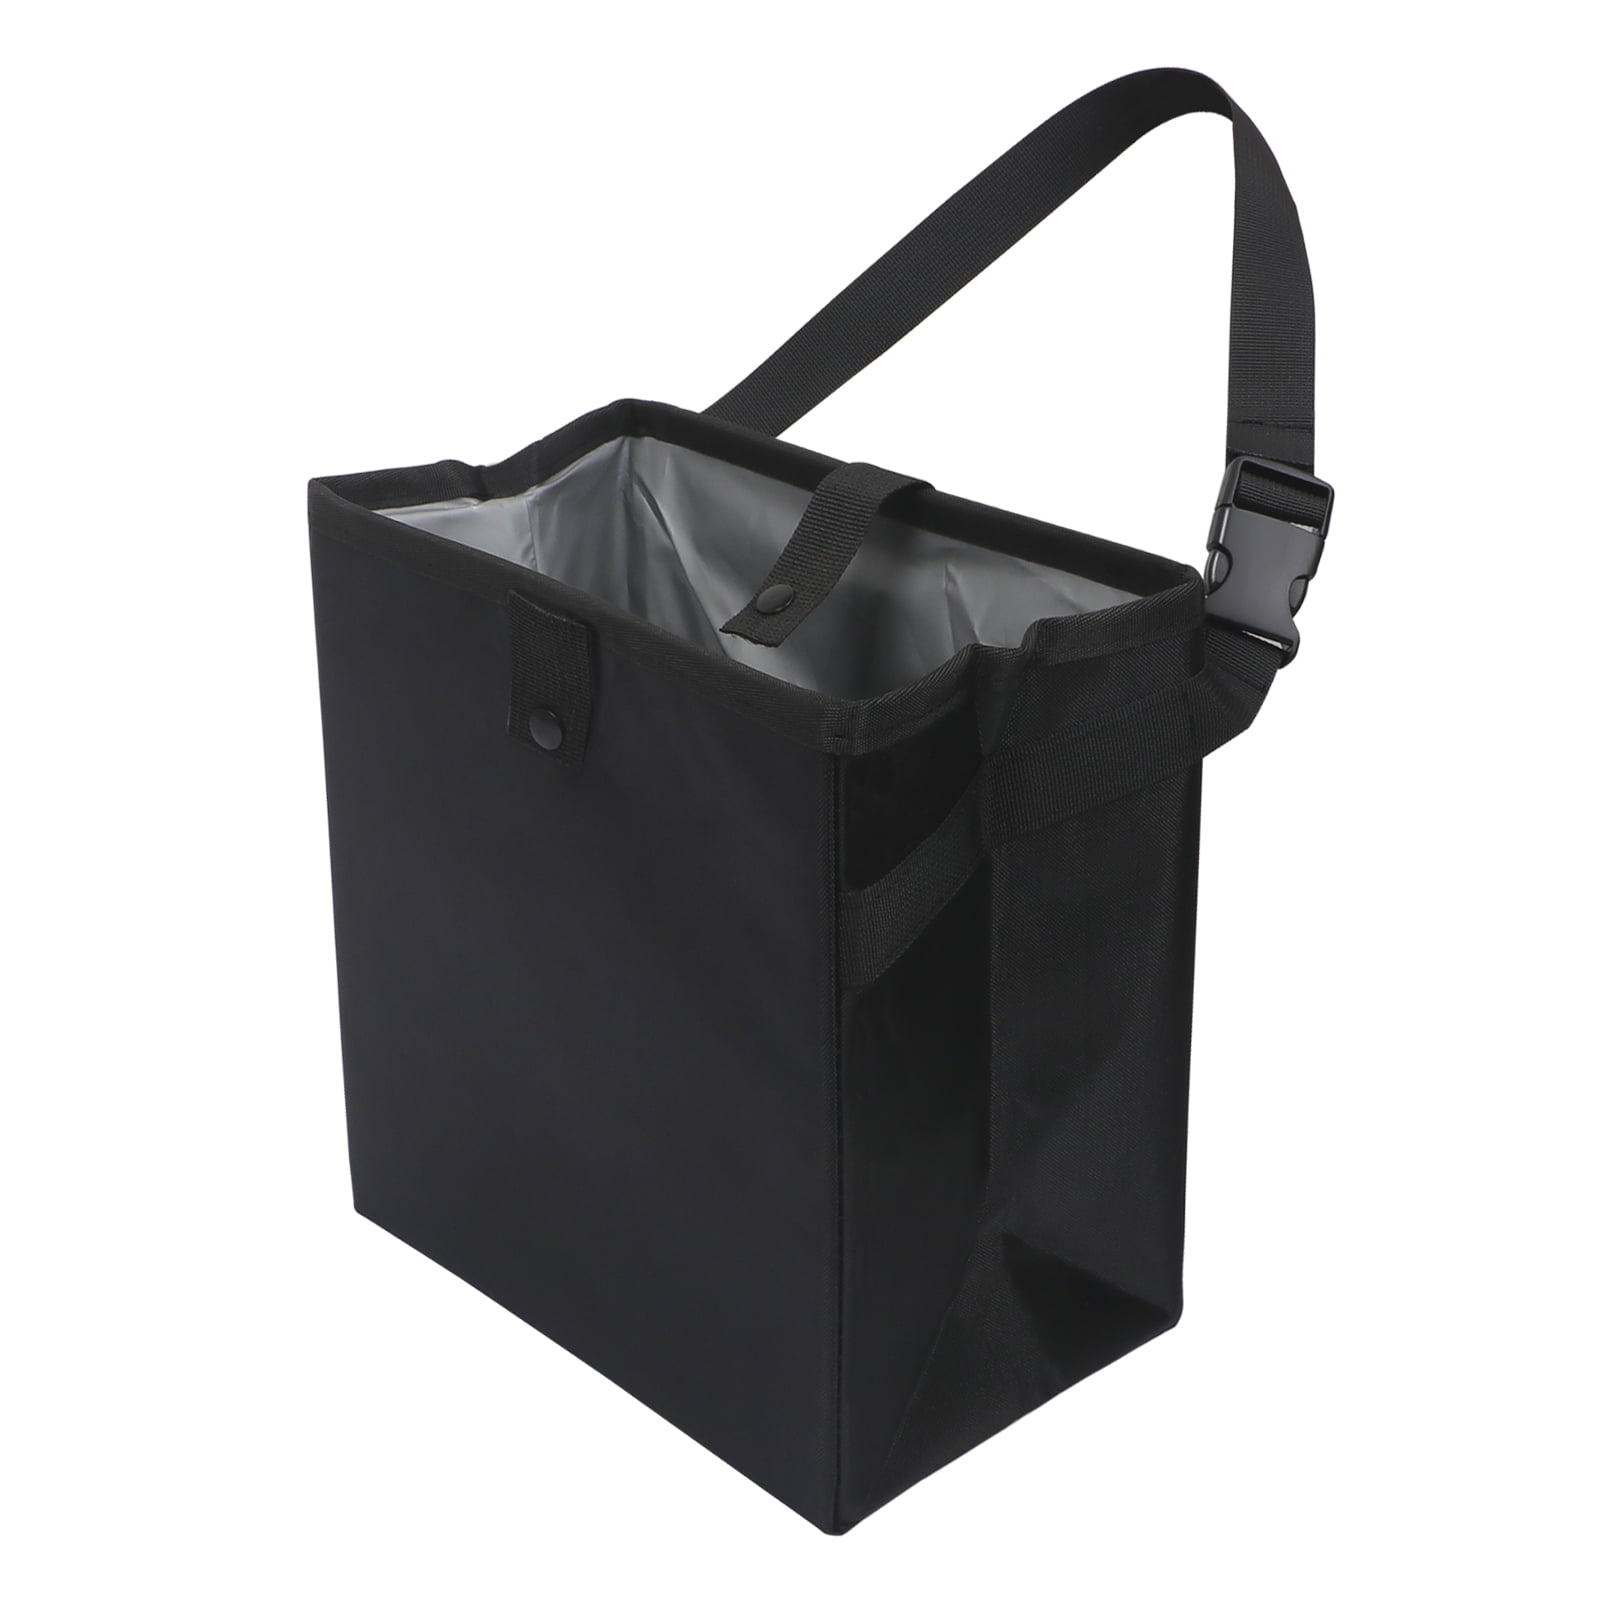 Leather Car Garbage Can ZeChok Foldable and Leak-Proof Car Storage Bag Comes with Detachable Waterproof Inner Tank Tidy Auto Organization & Boot Maintenance Suitable for All Car Models